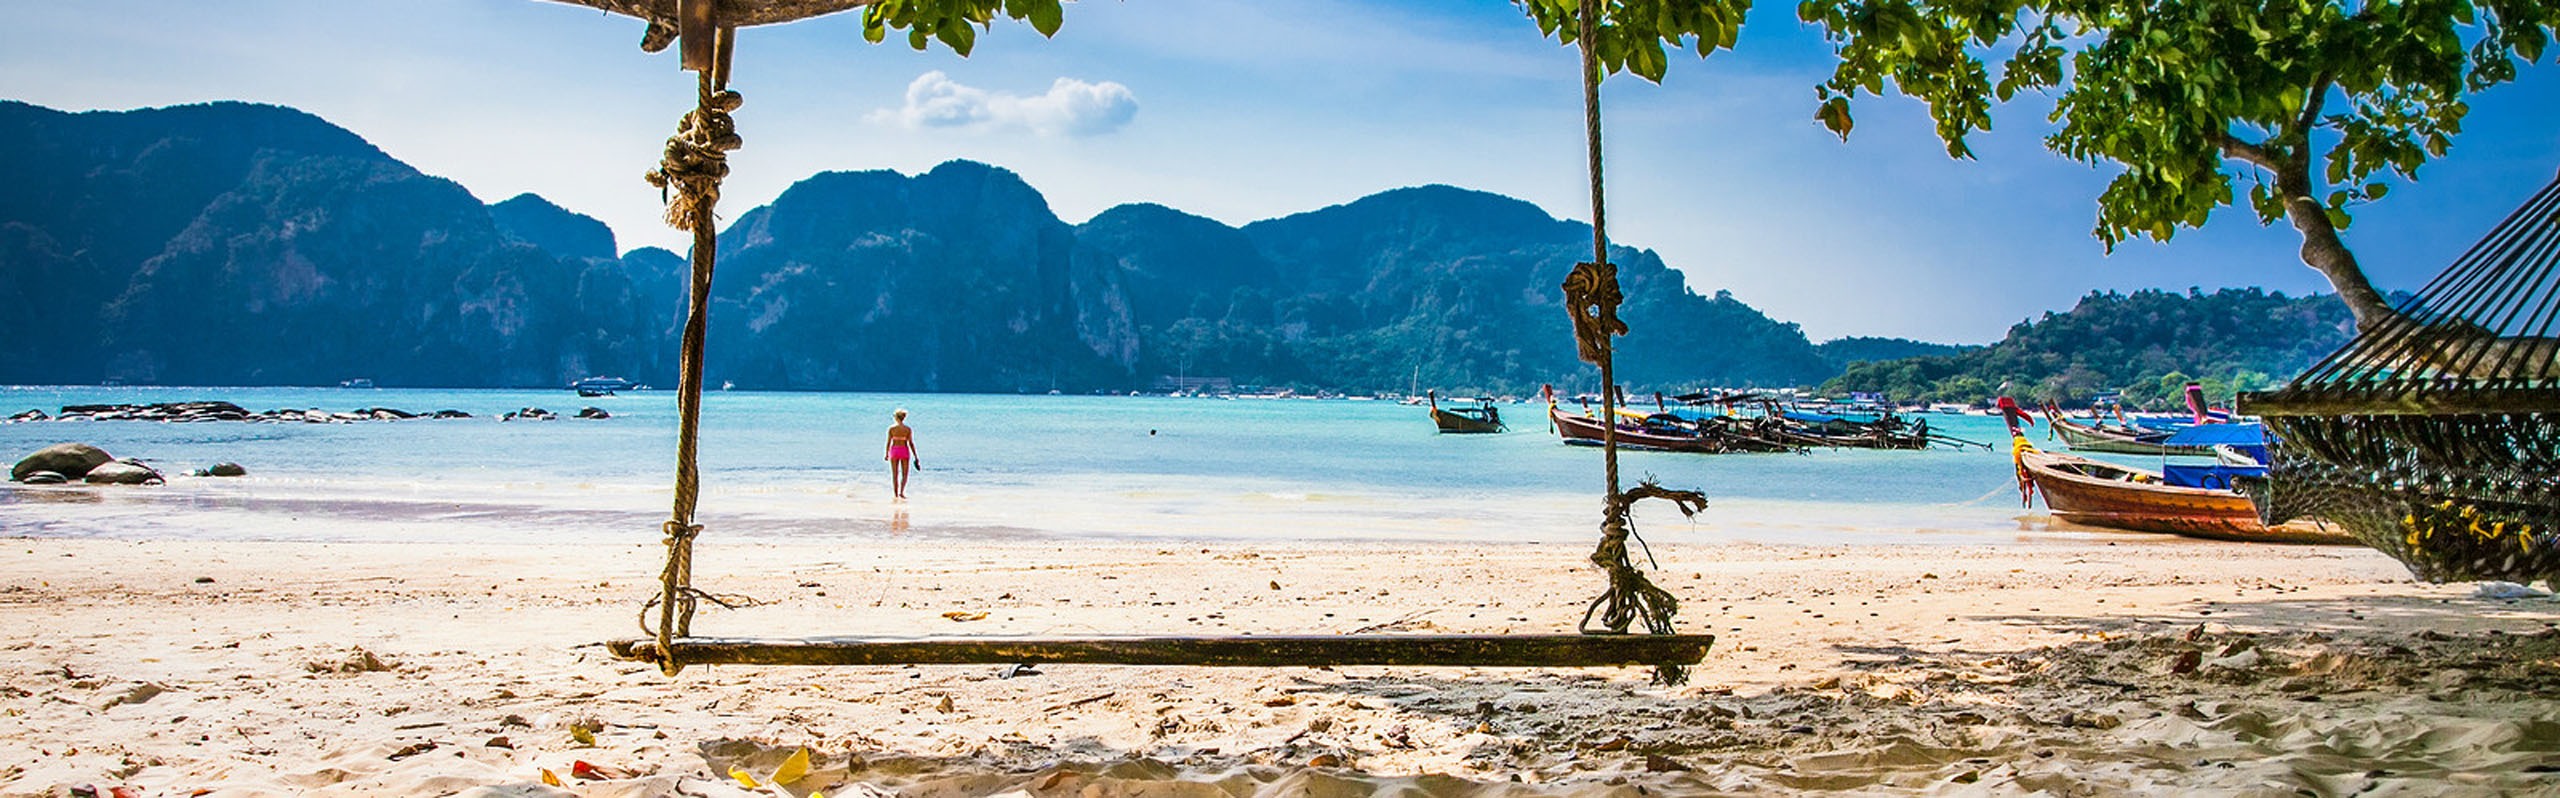 How to Get to and around Phi Phi Island